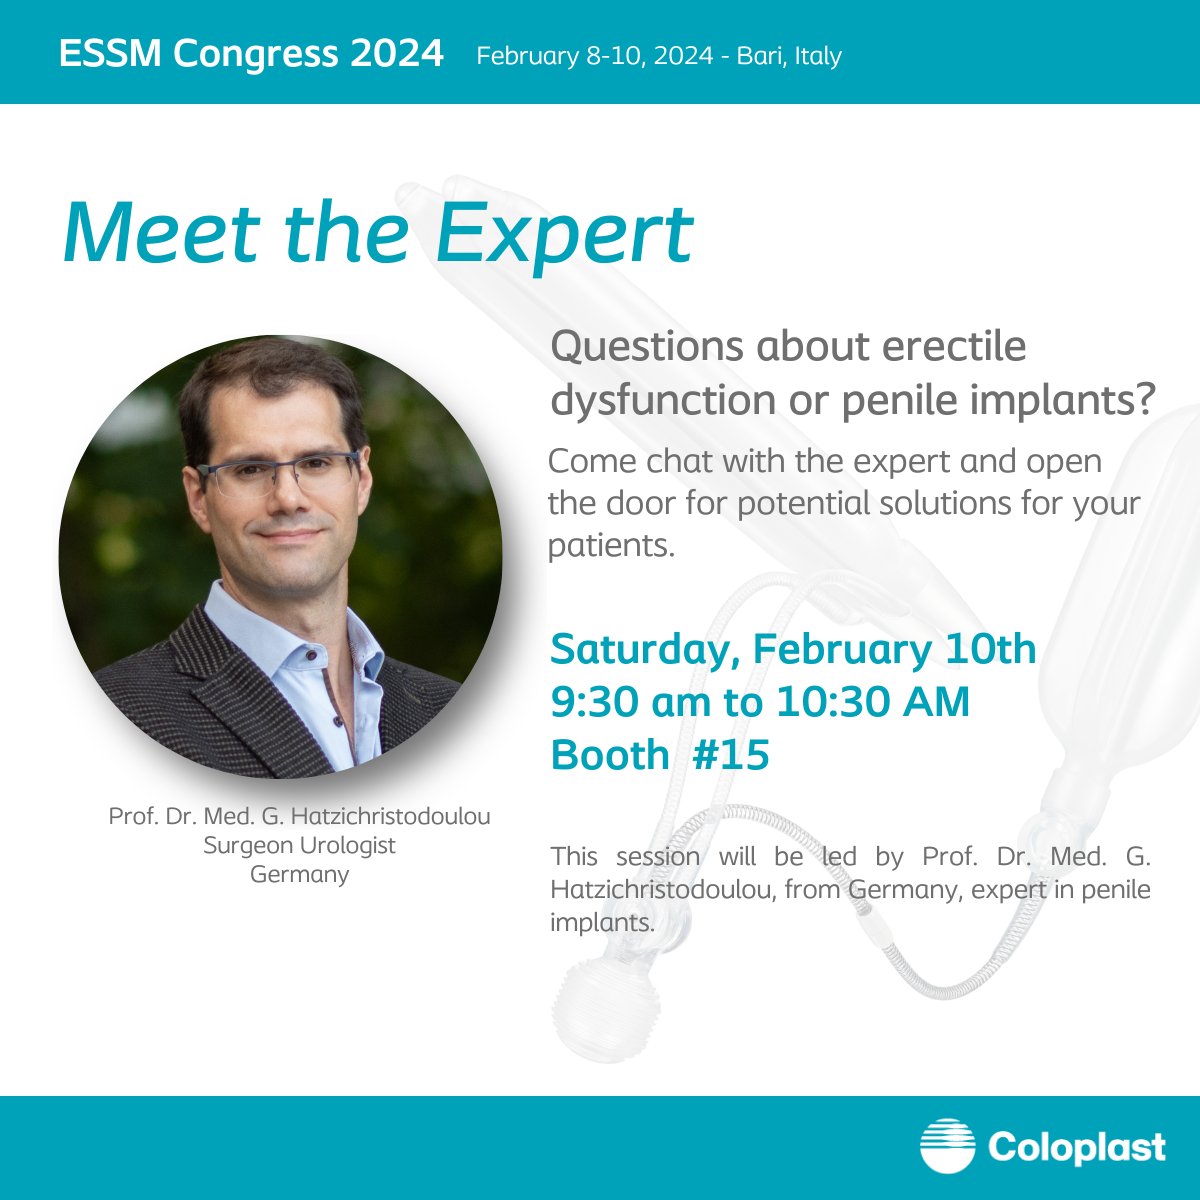 #ESSM2024 Got questions about penile implants? Come chat with the expert and explore potential solutions for your patients. On Saturday (Feb 10), at 9:30 am - 10:30 am on Booth #15

Session led by Prof. Dr. Med. G. Hatzichristodoulou, Surgeon Urologist from Germany.